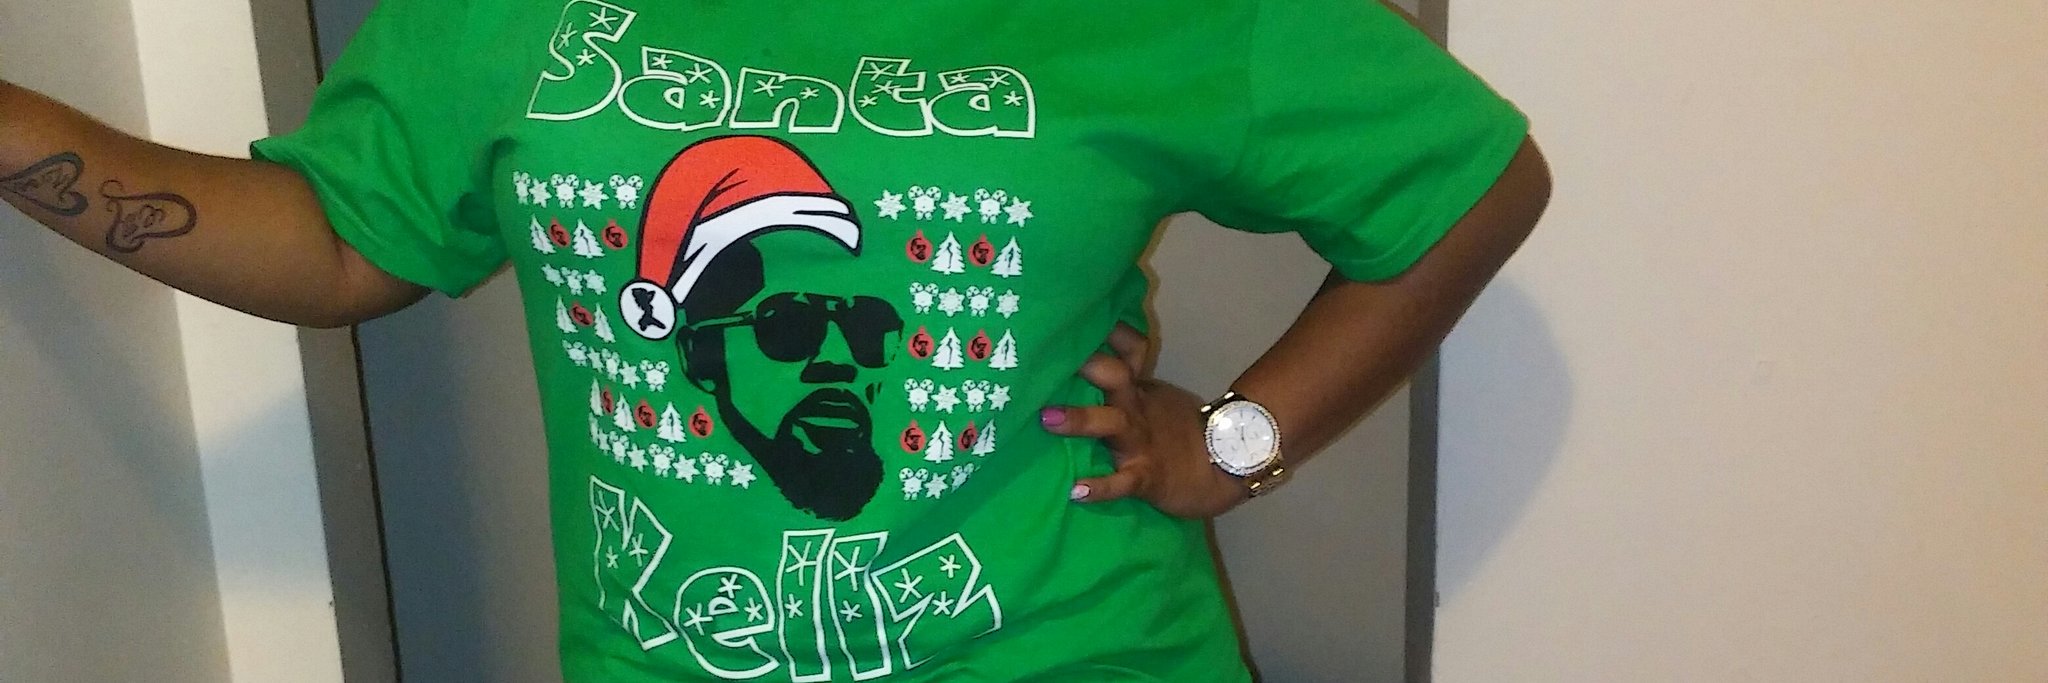 Christmas Day I had to rock my shirt!!! R.kelly please sing me happy birthday 